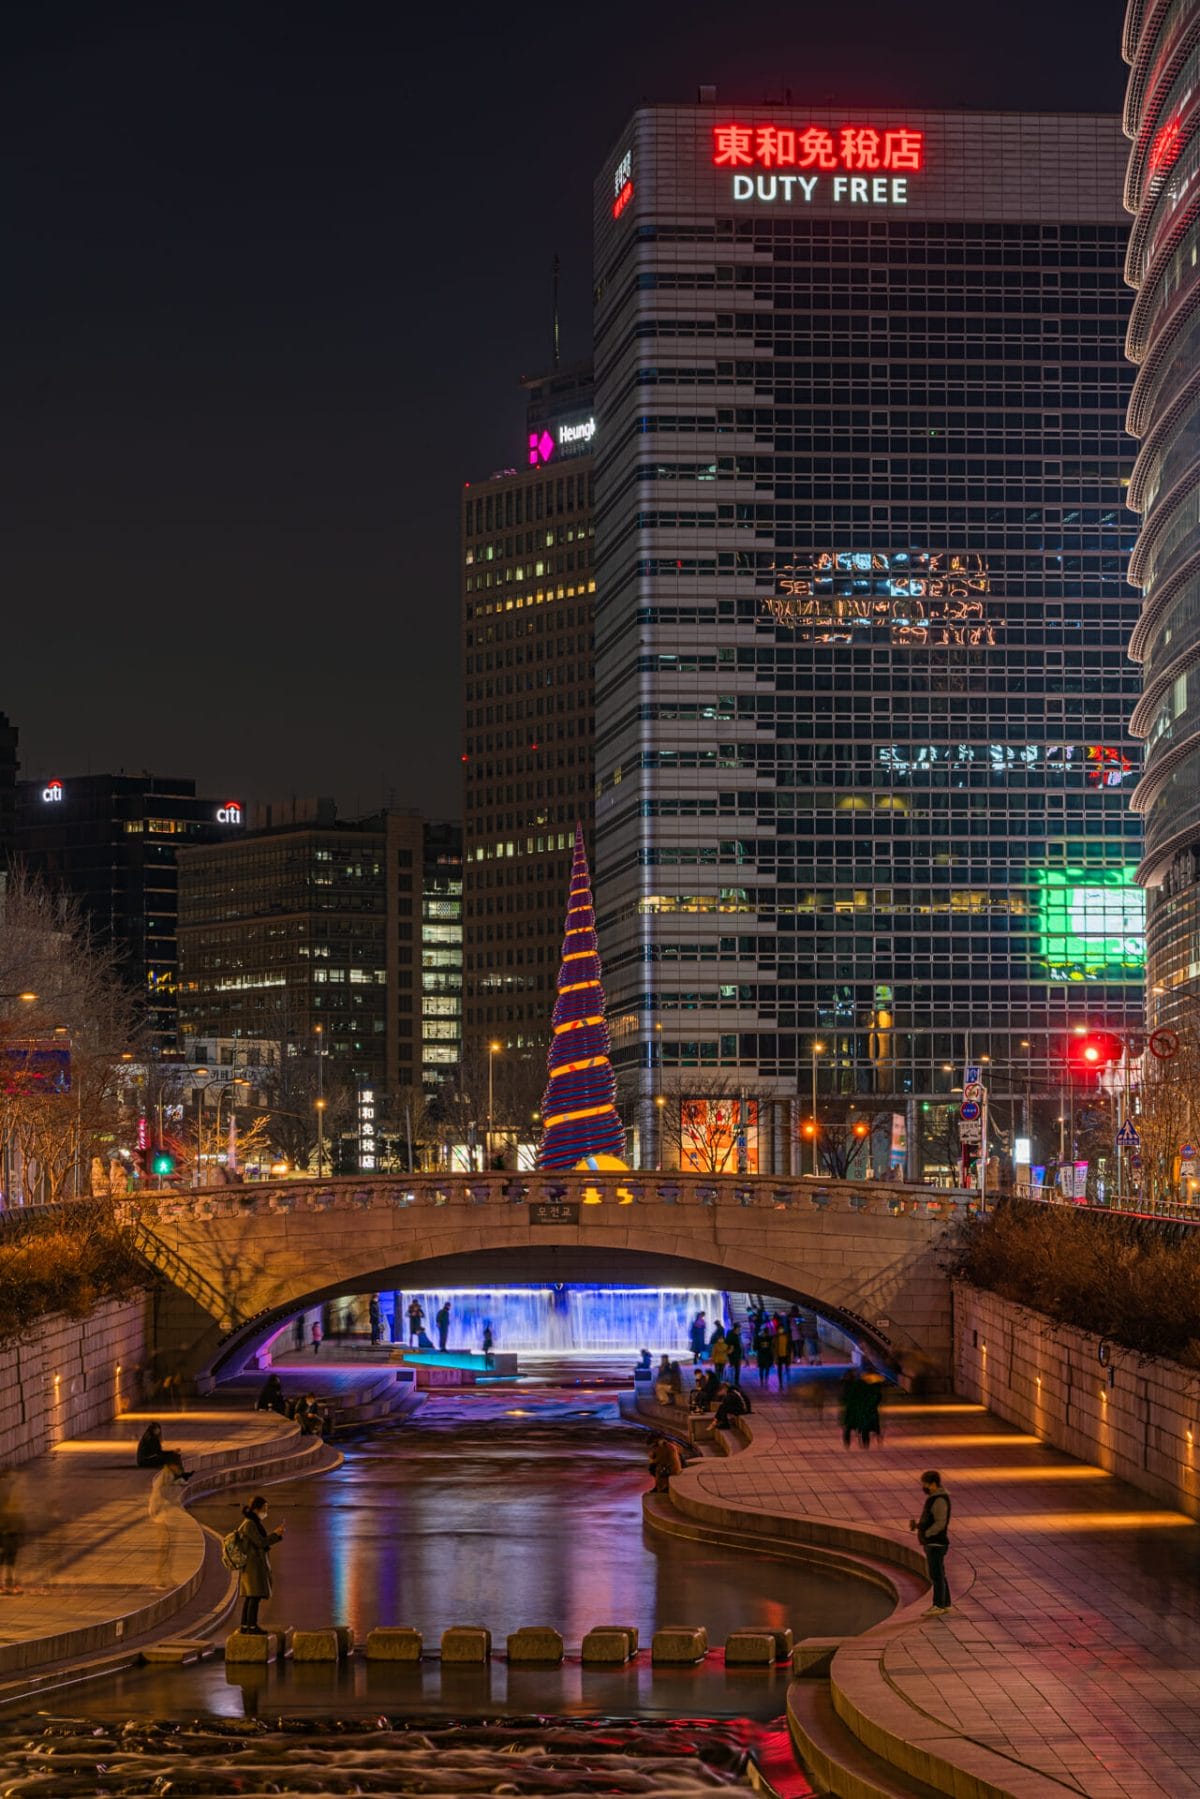 Seoul at Night - Best Views, Activities, Areas and More 18